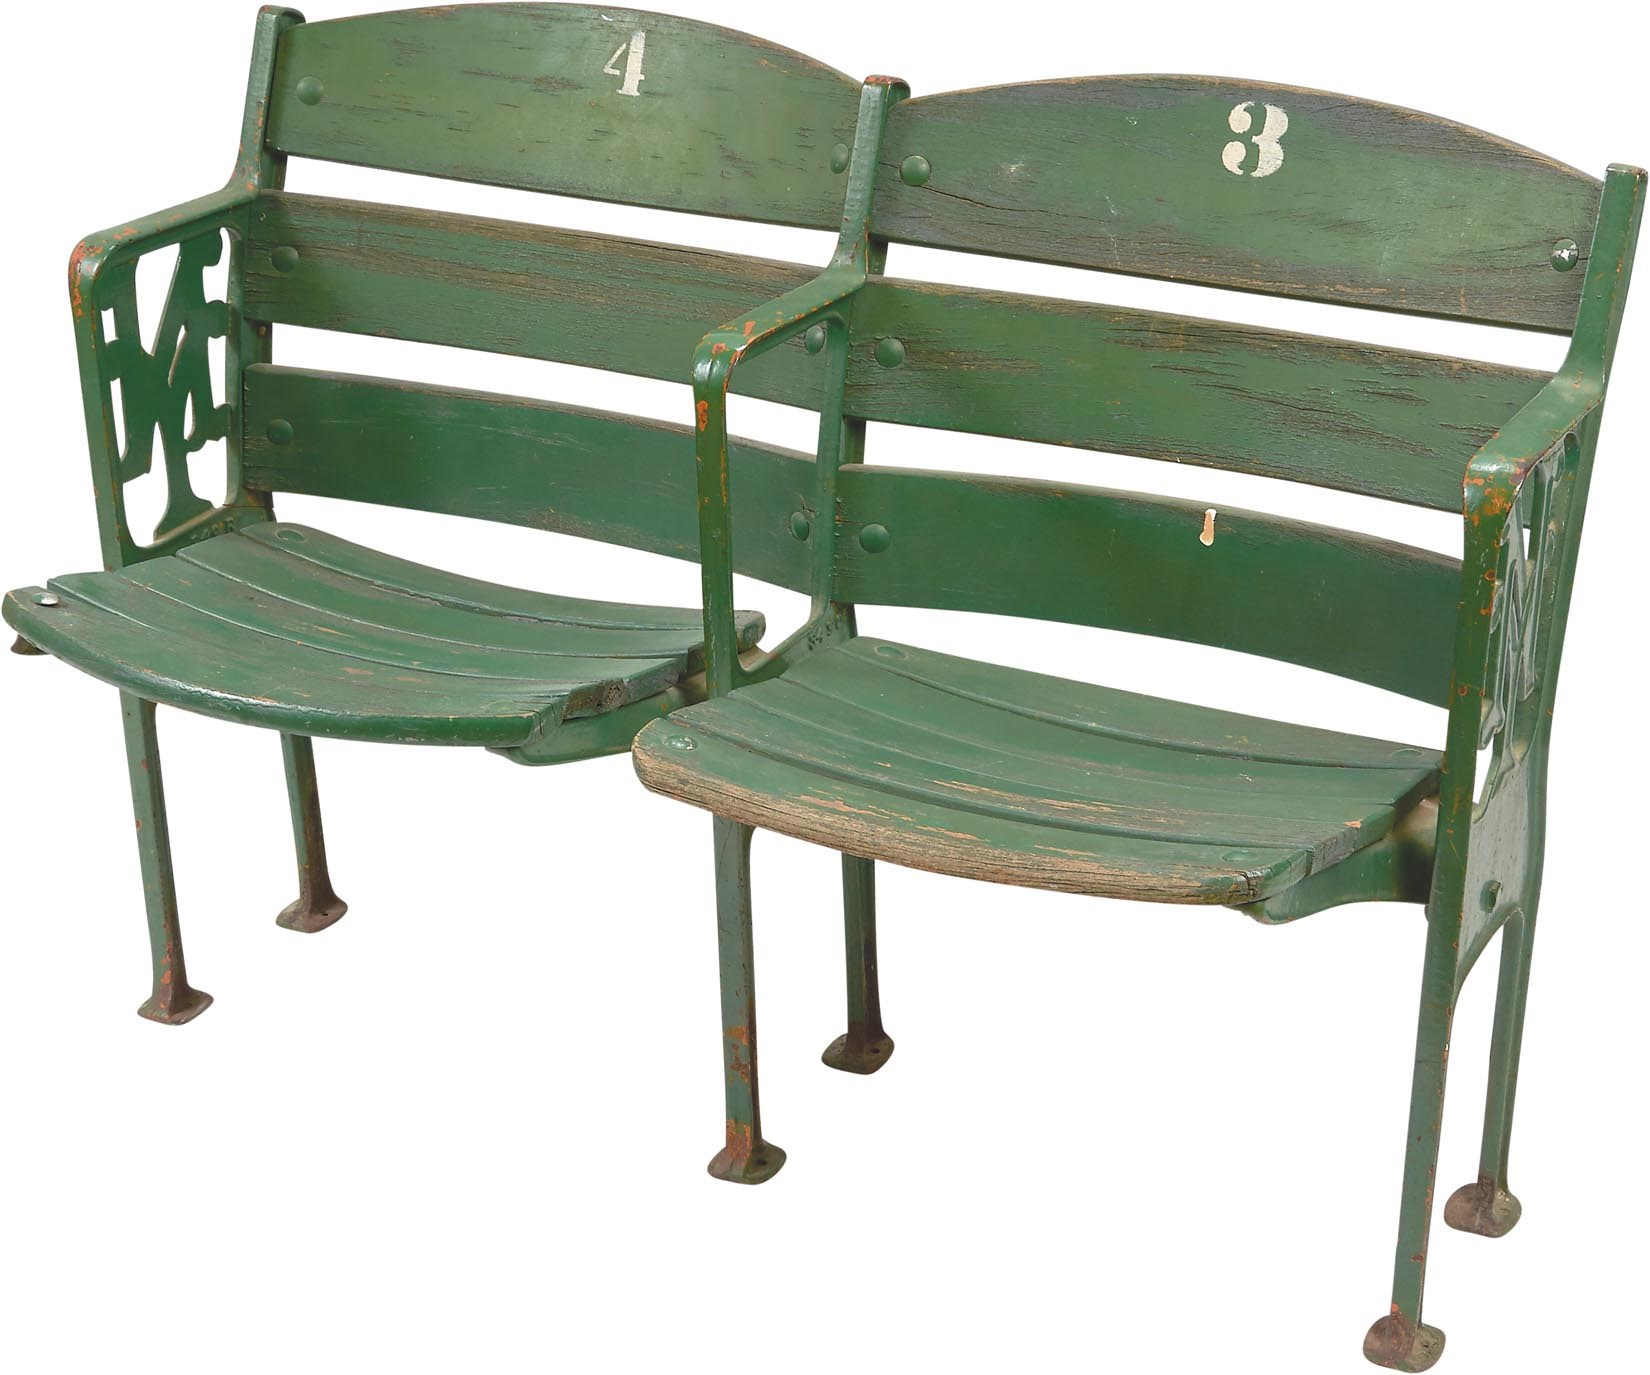 NY Yankees, Giants & Mets - Polo Grounds Double Figural Seats